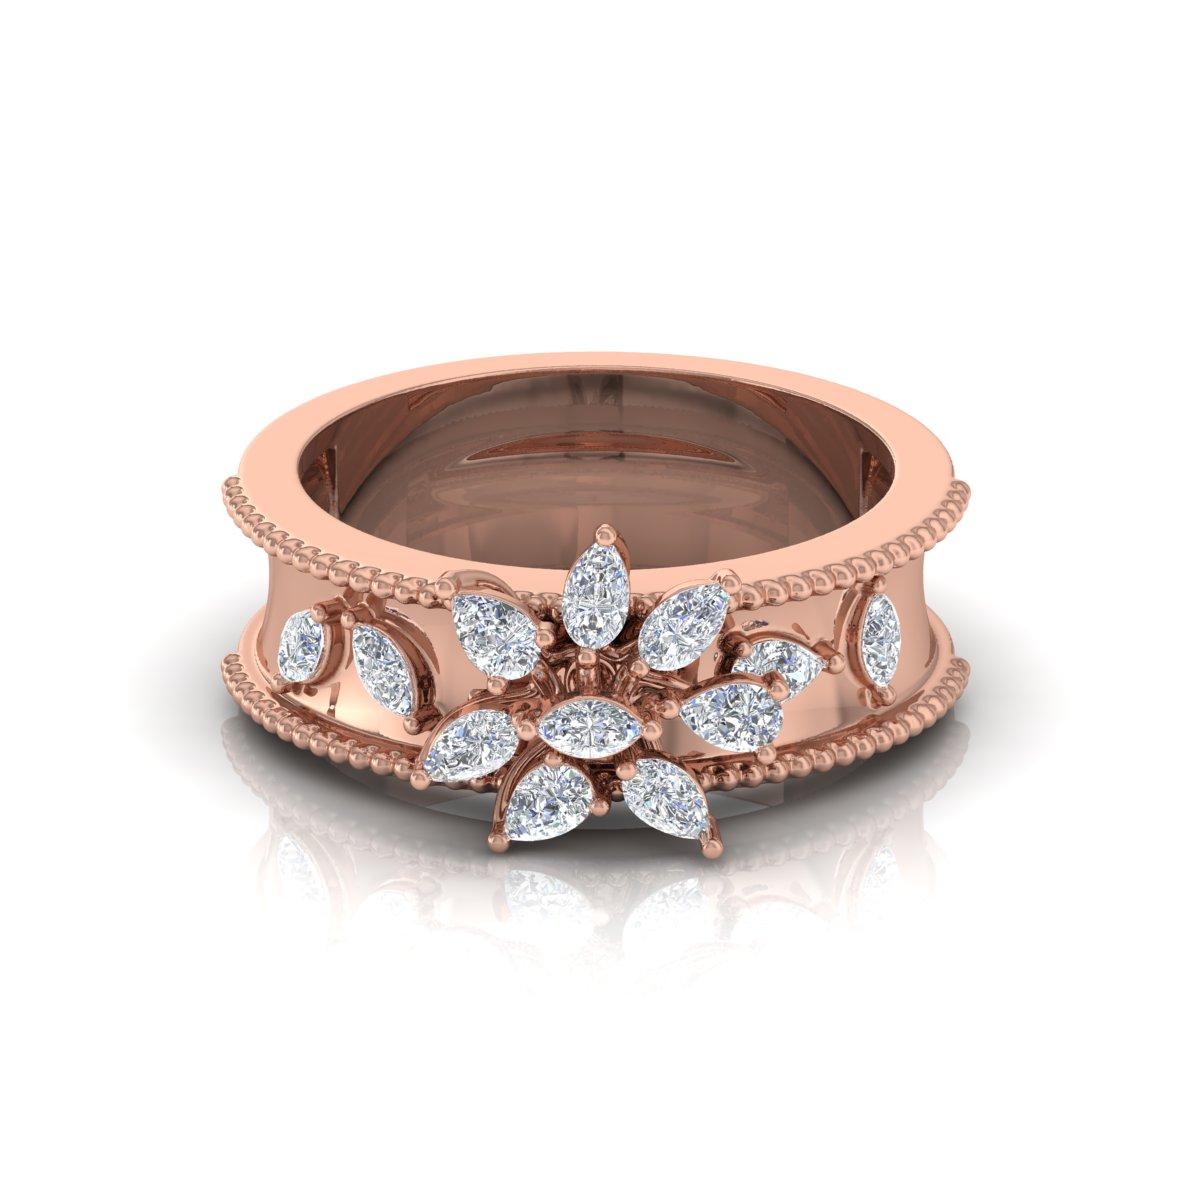 For Sale:  0.70 Carat Pear Marquise Diamond Band Ring Solid 18k Rose Gold Handmade Jewelry 5